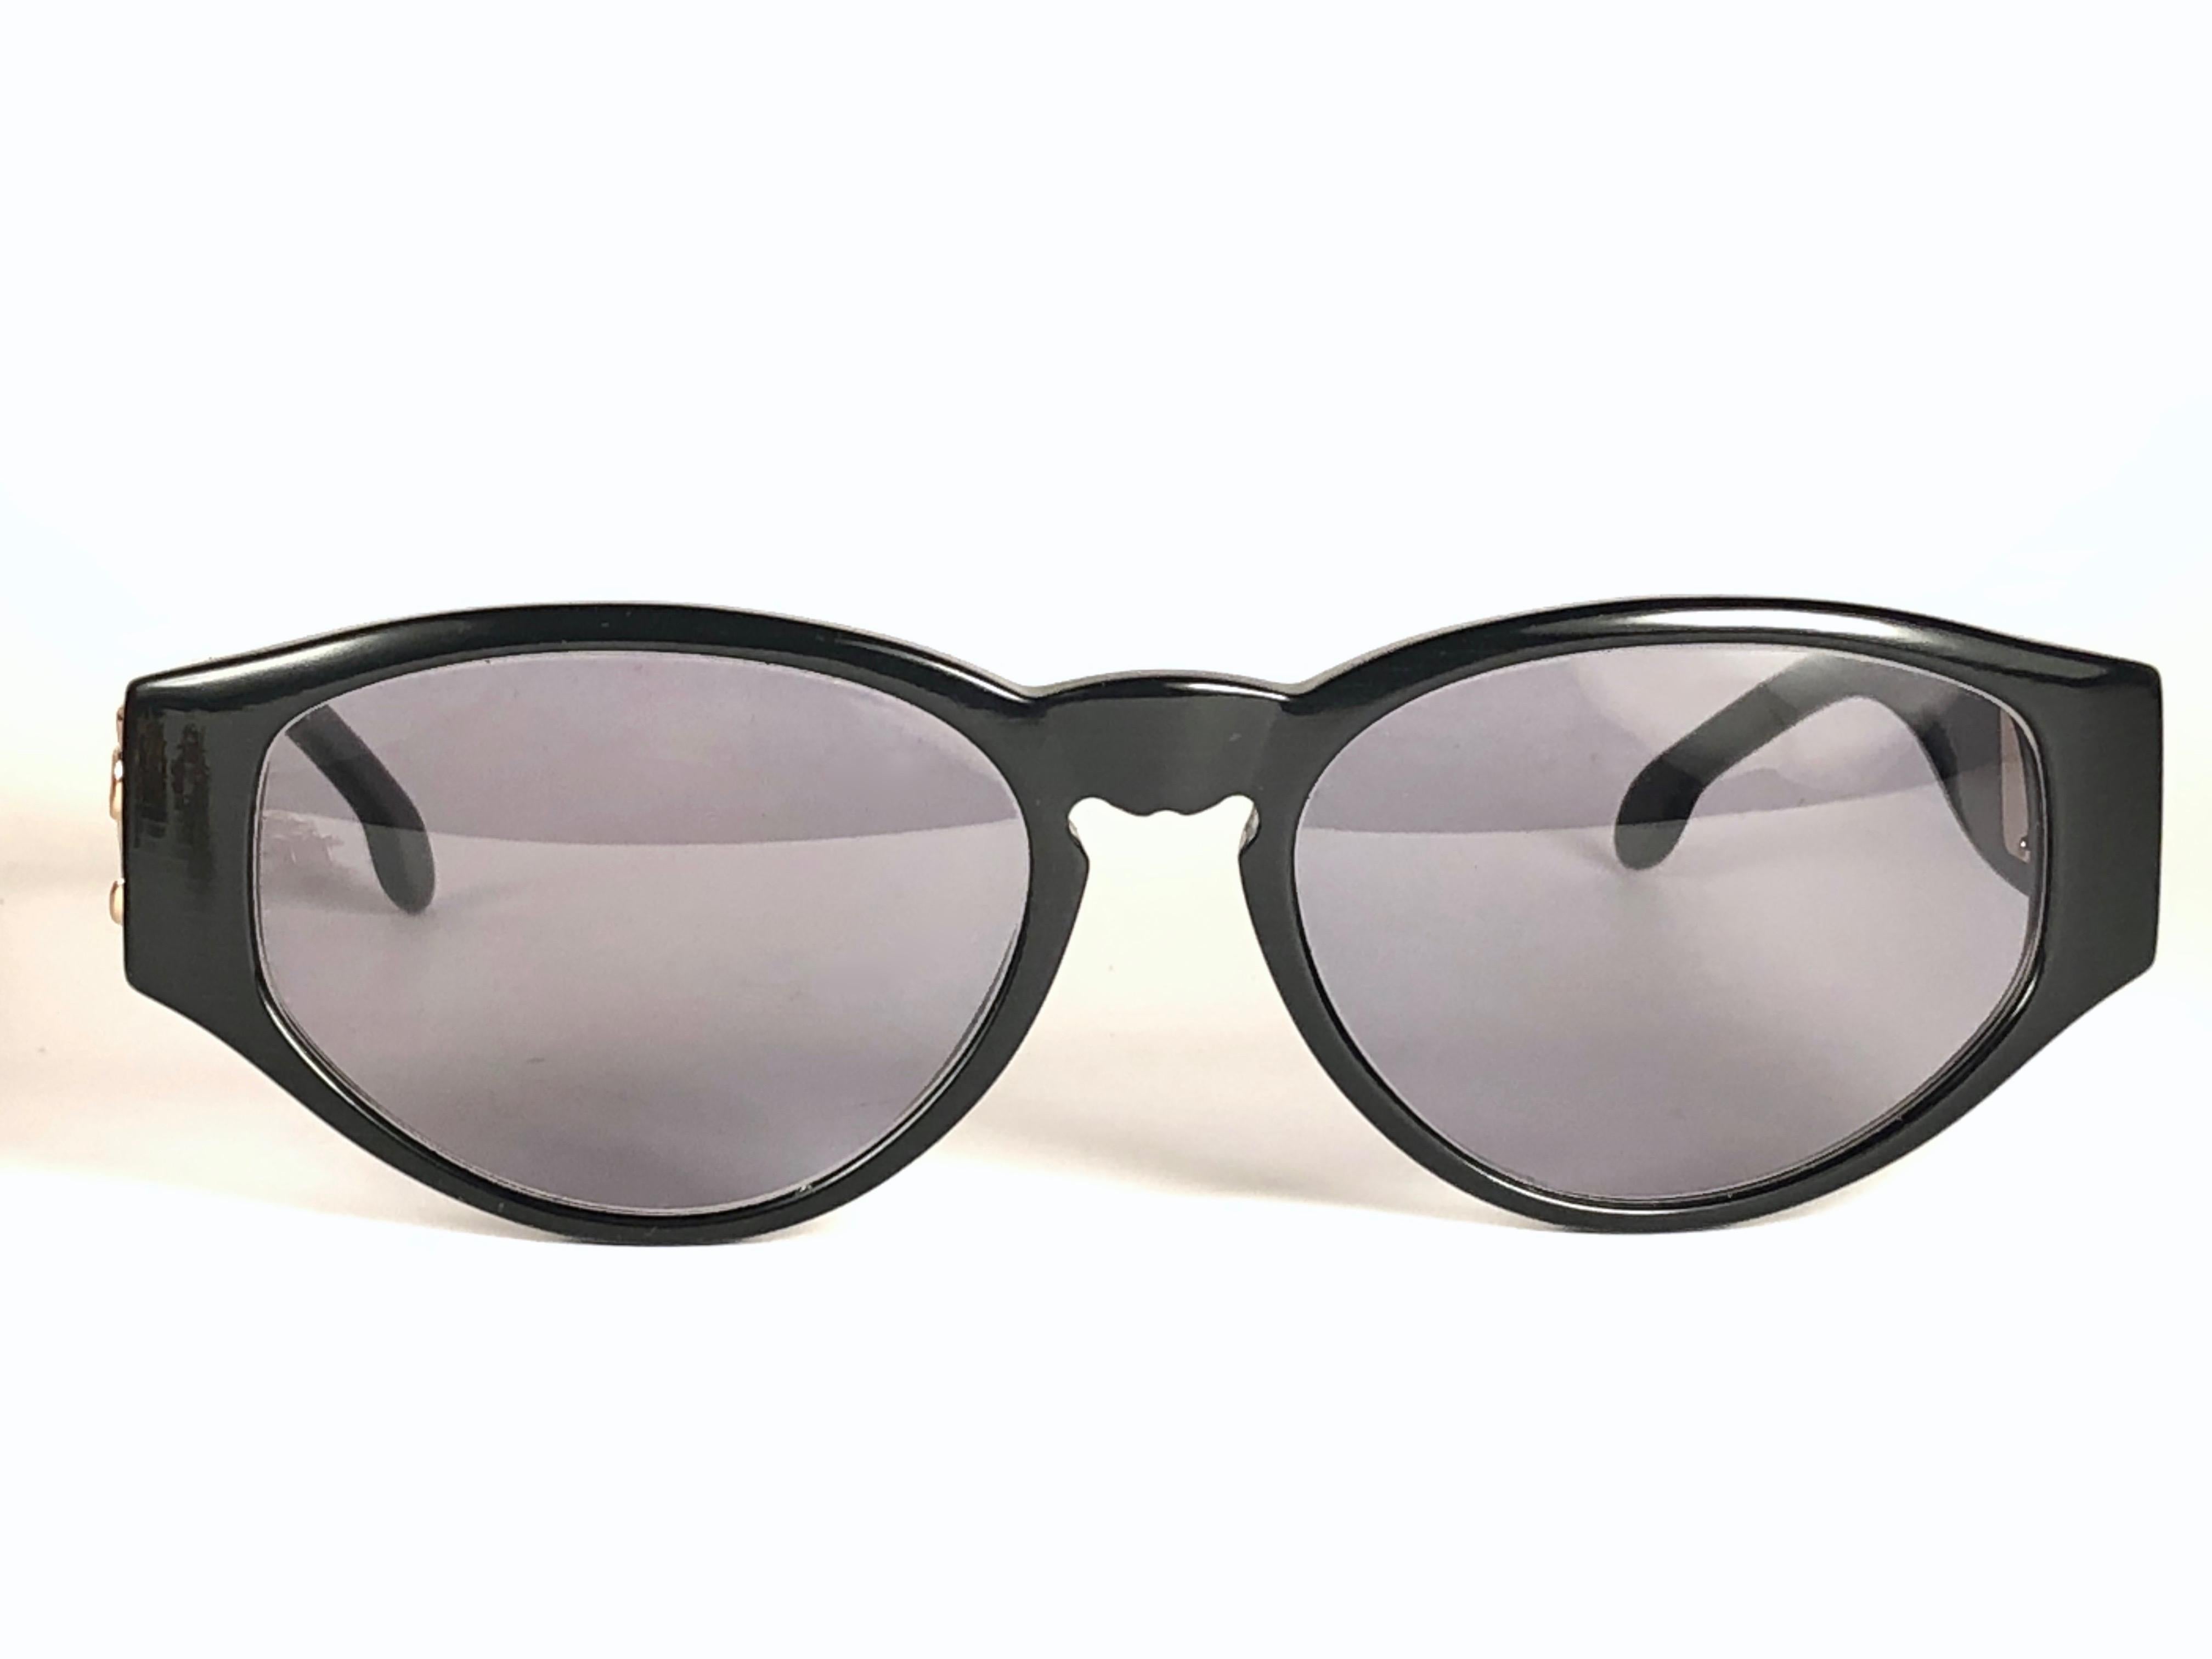 
 
Dashing pair of New Vintage Karl Lagerfeld sunglasses black with gold interchangeable charms on the temples sporting a spotless pair of dark grey lenses. 
 
New, never used or displayed this pair of vintage karl lagerfeld is a chic and timeless